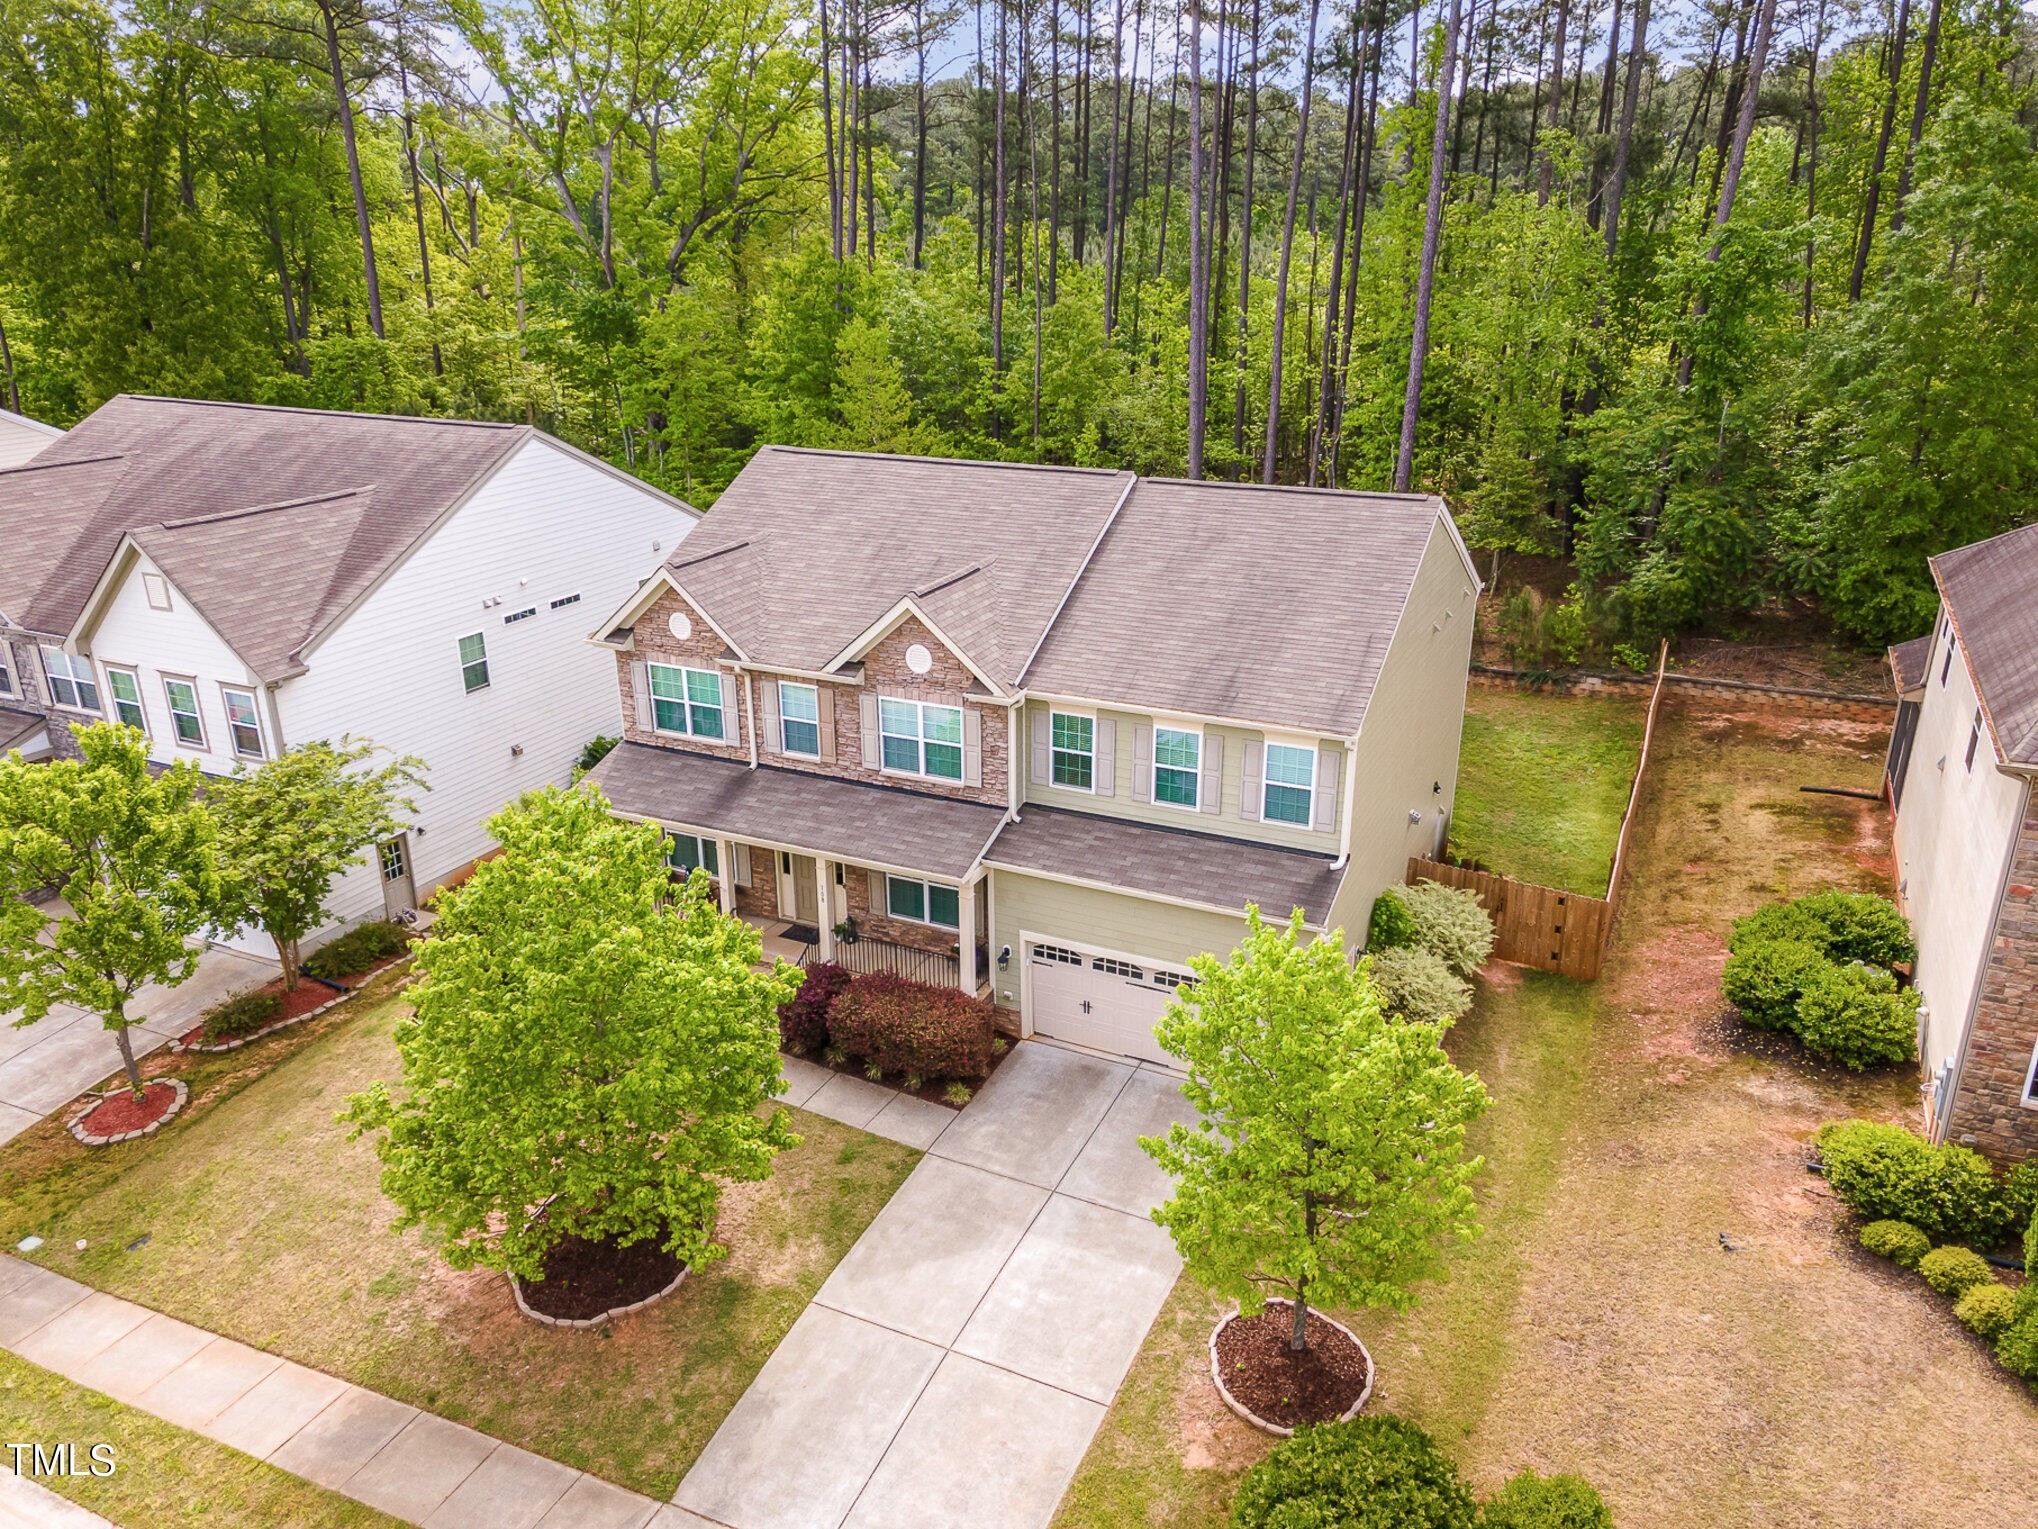 38. 108 Ulverston Drive, Holly Springs Nc 27540